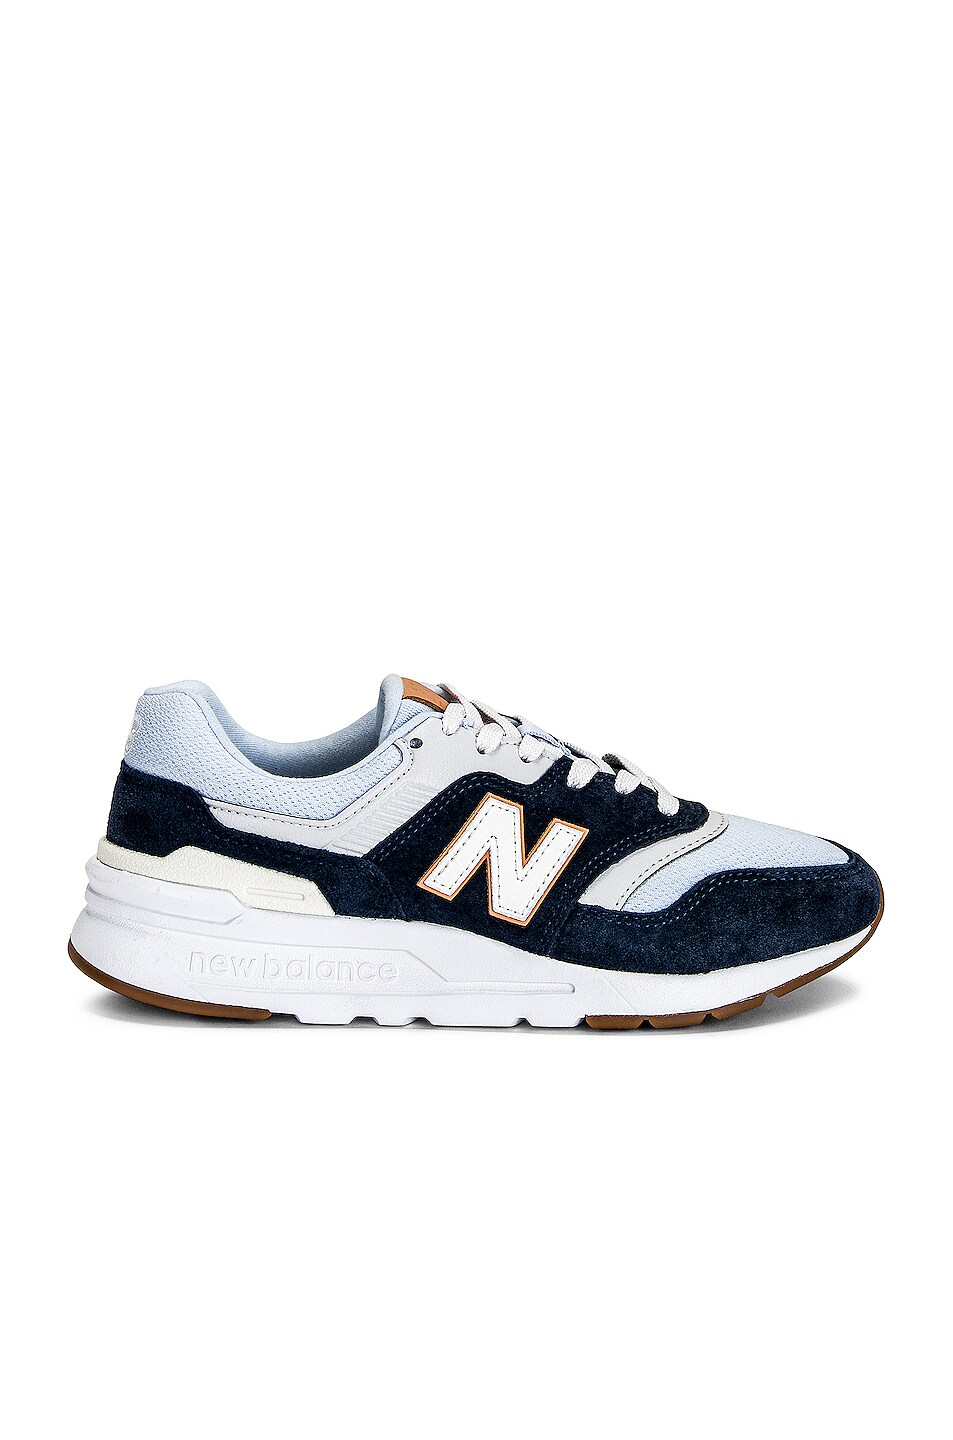 Image 1 of New Balance 997H Sneakers in Natural Indigo & White